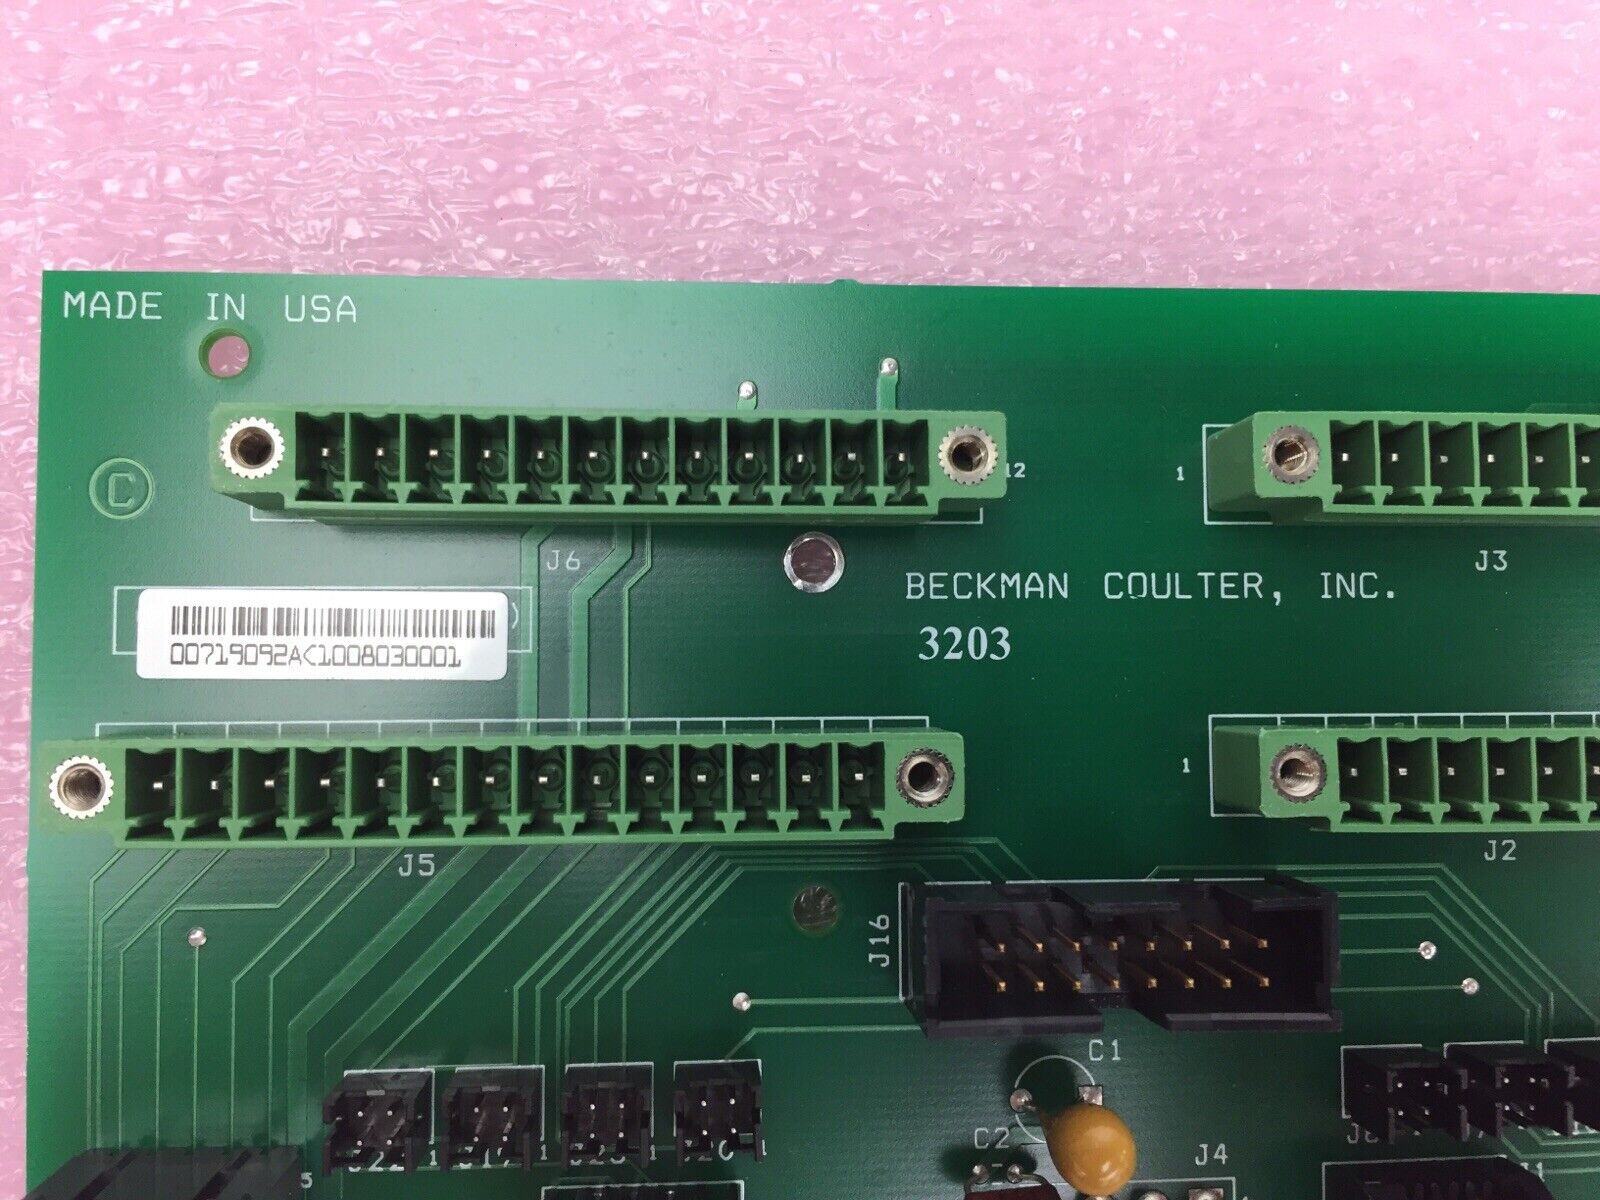 Beckman Coulter 719091 - P/W Board - Rev. AC - Replacement Part